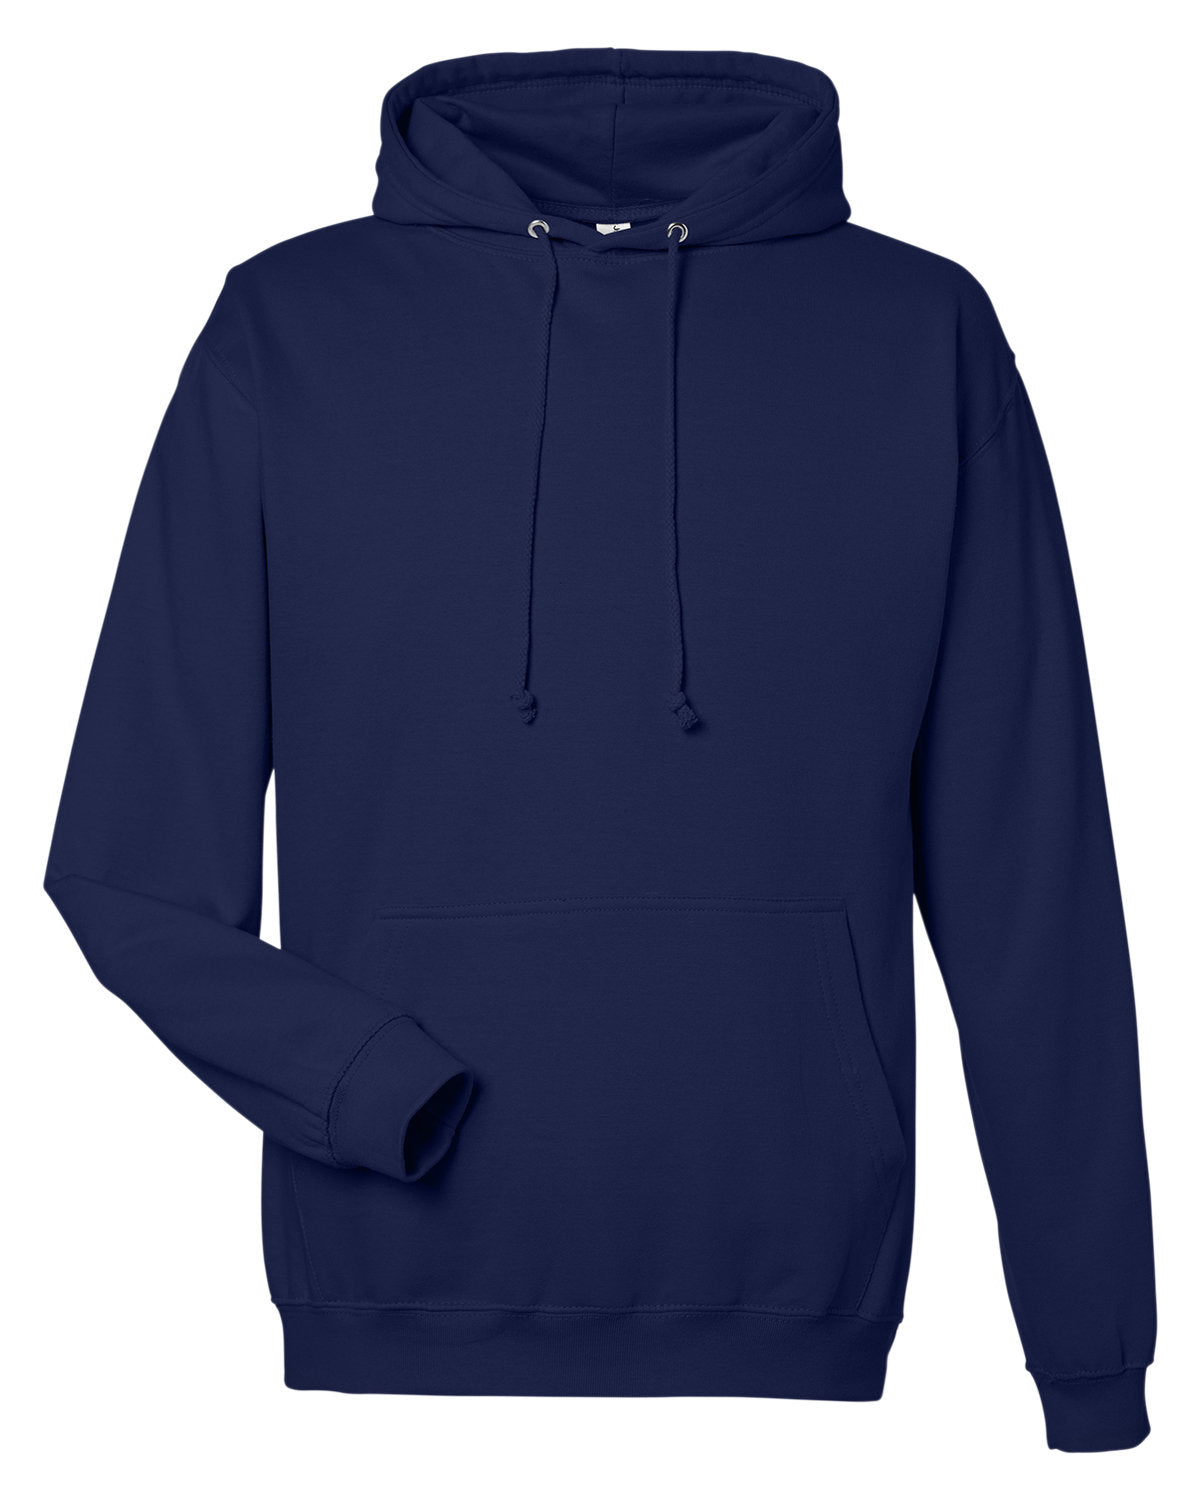 JHA001-Just Hoods By AWDis-OXFORD NAVY